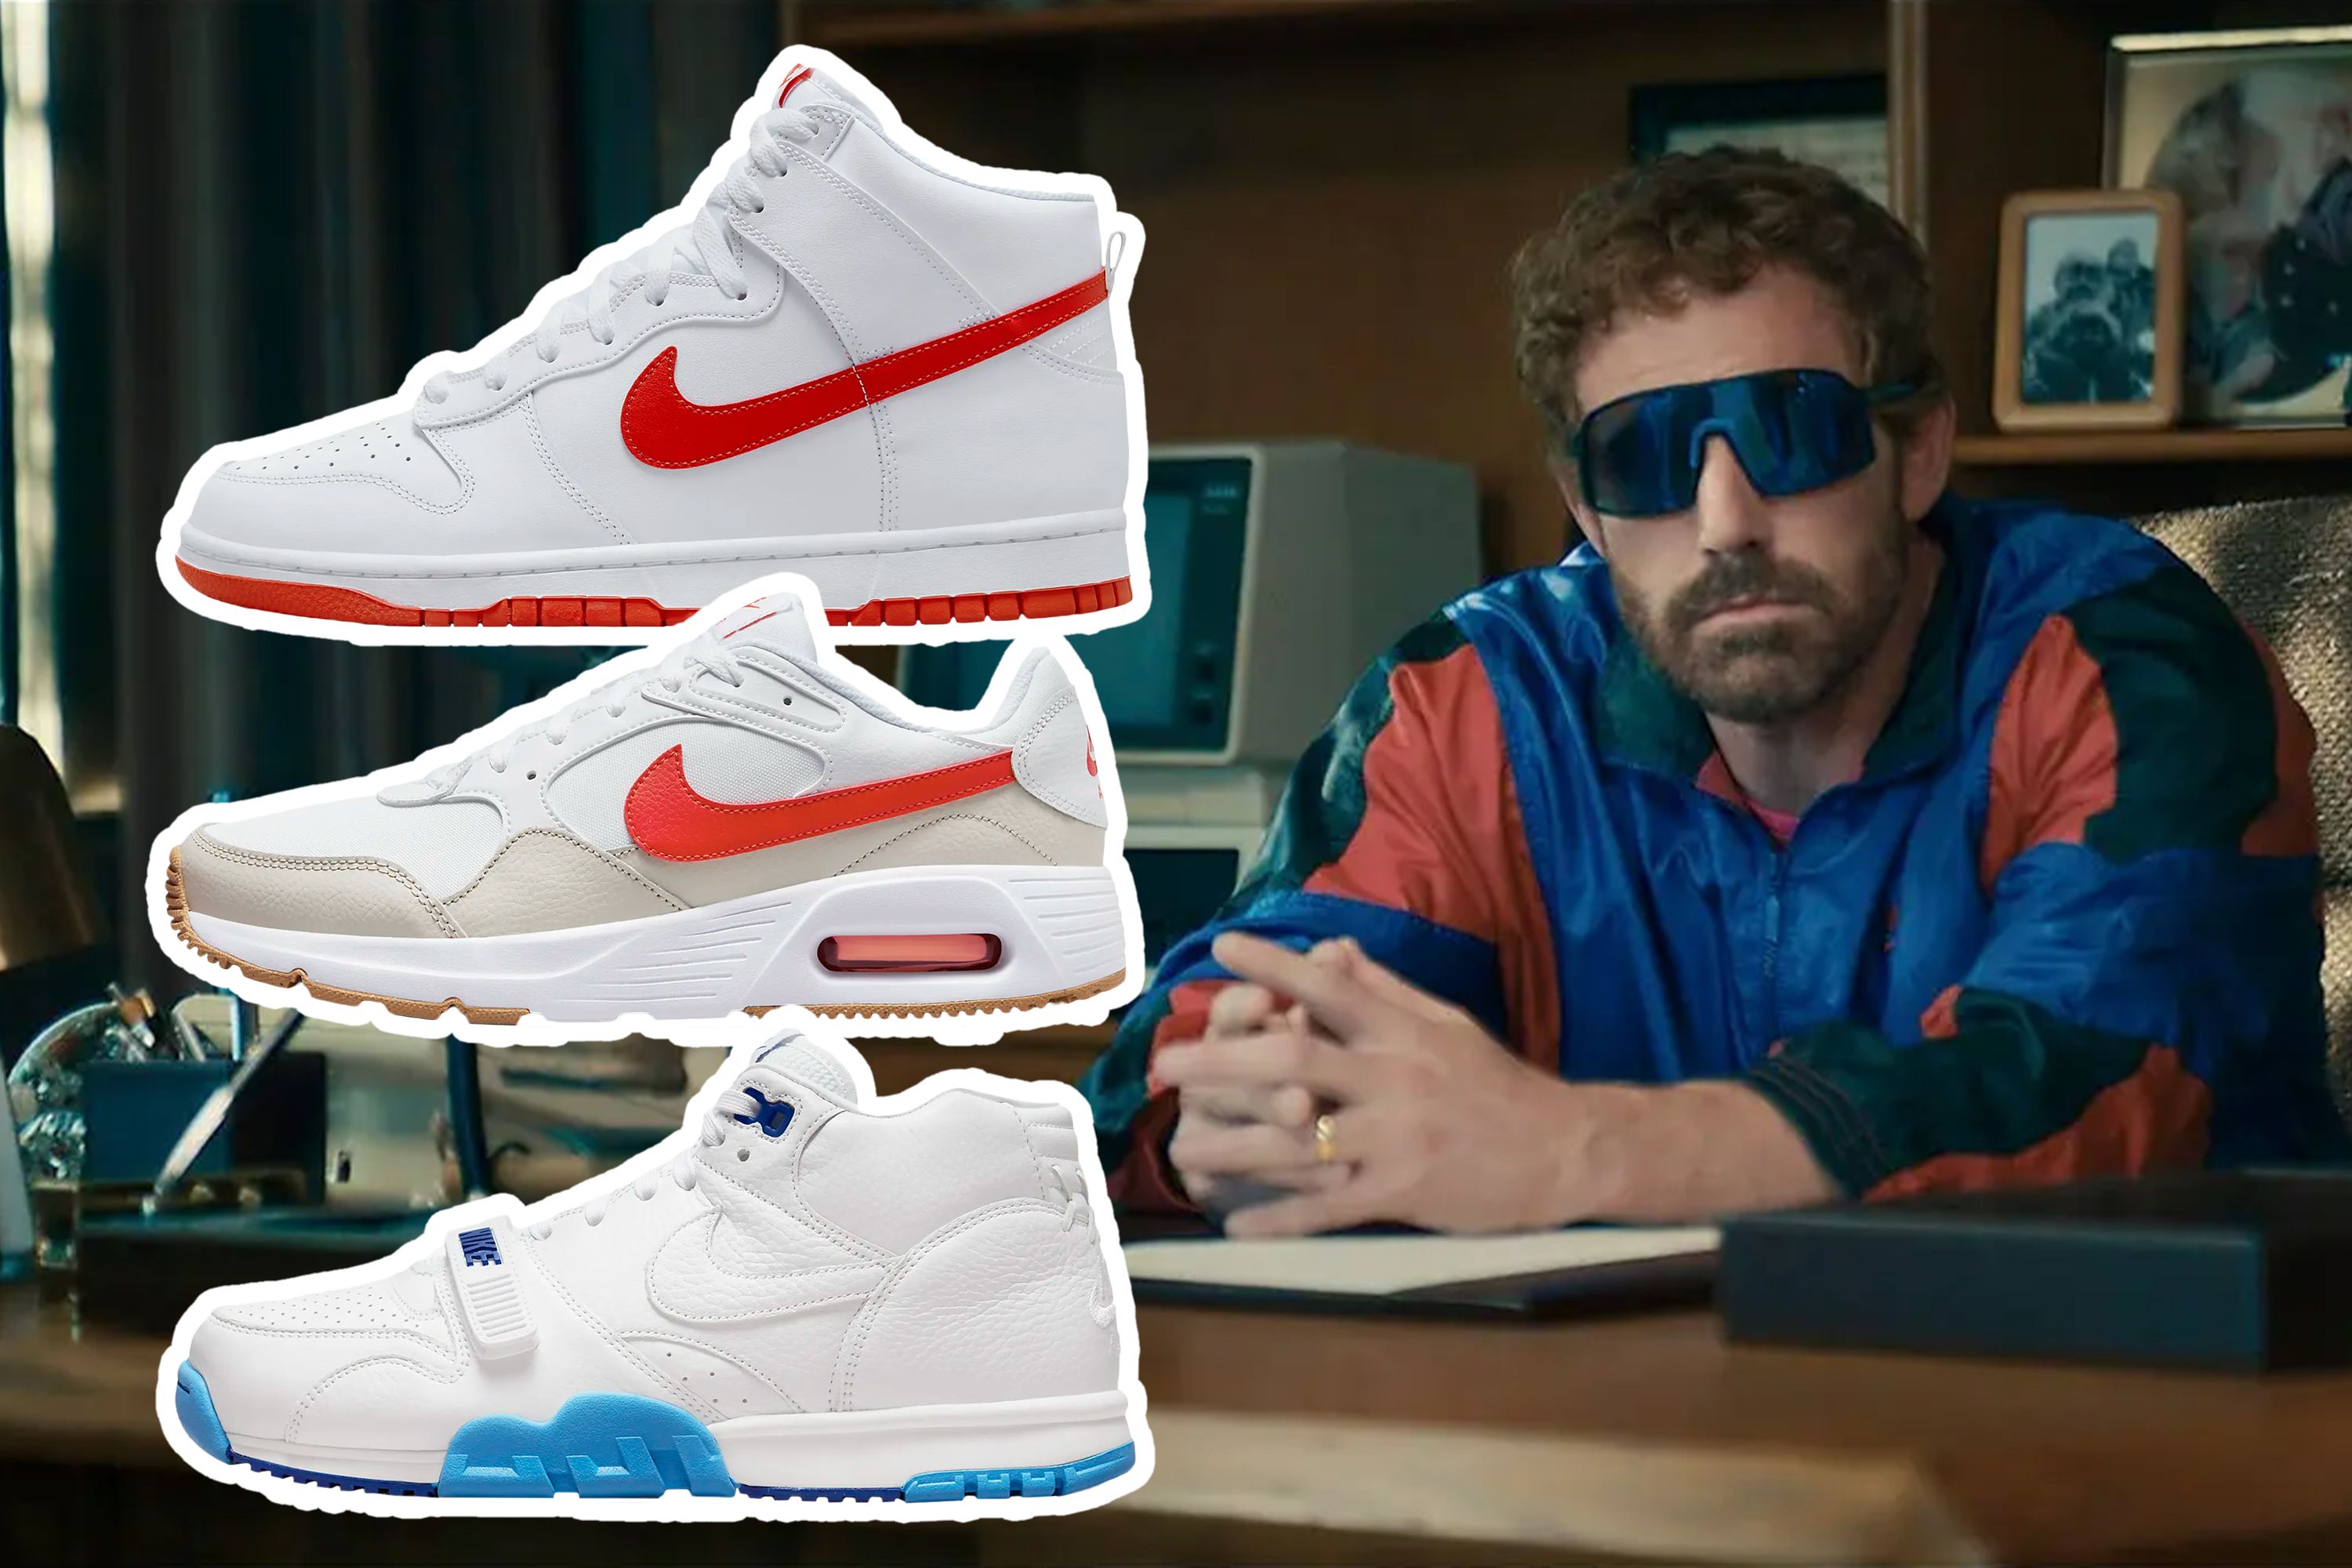 10 Nike Sneakers You Can Buy Now Capture the 1980s Vibes of 'Air'